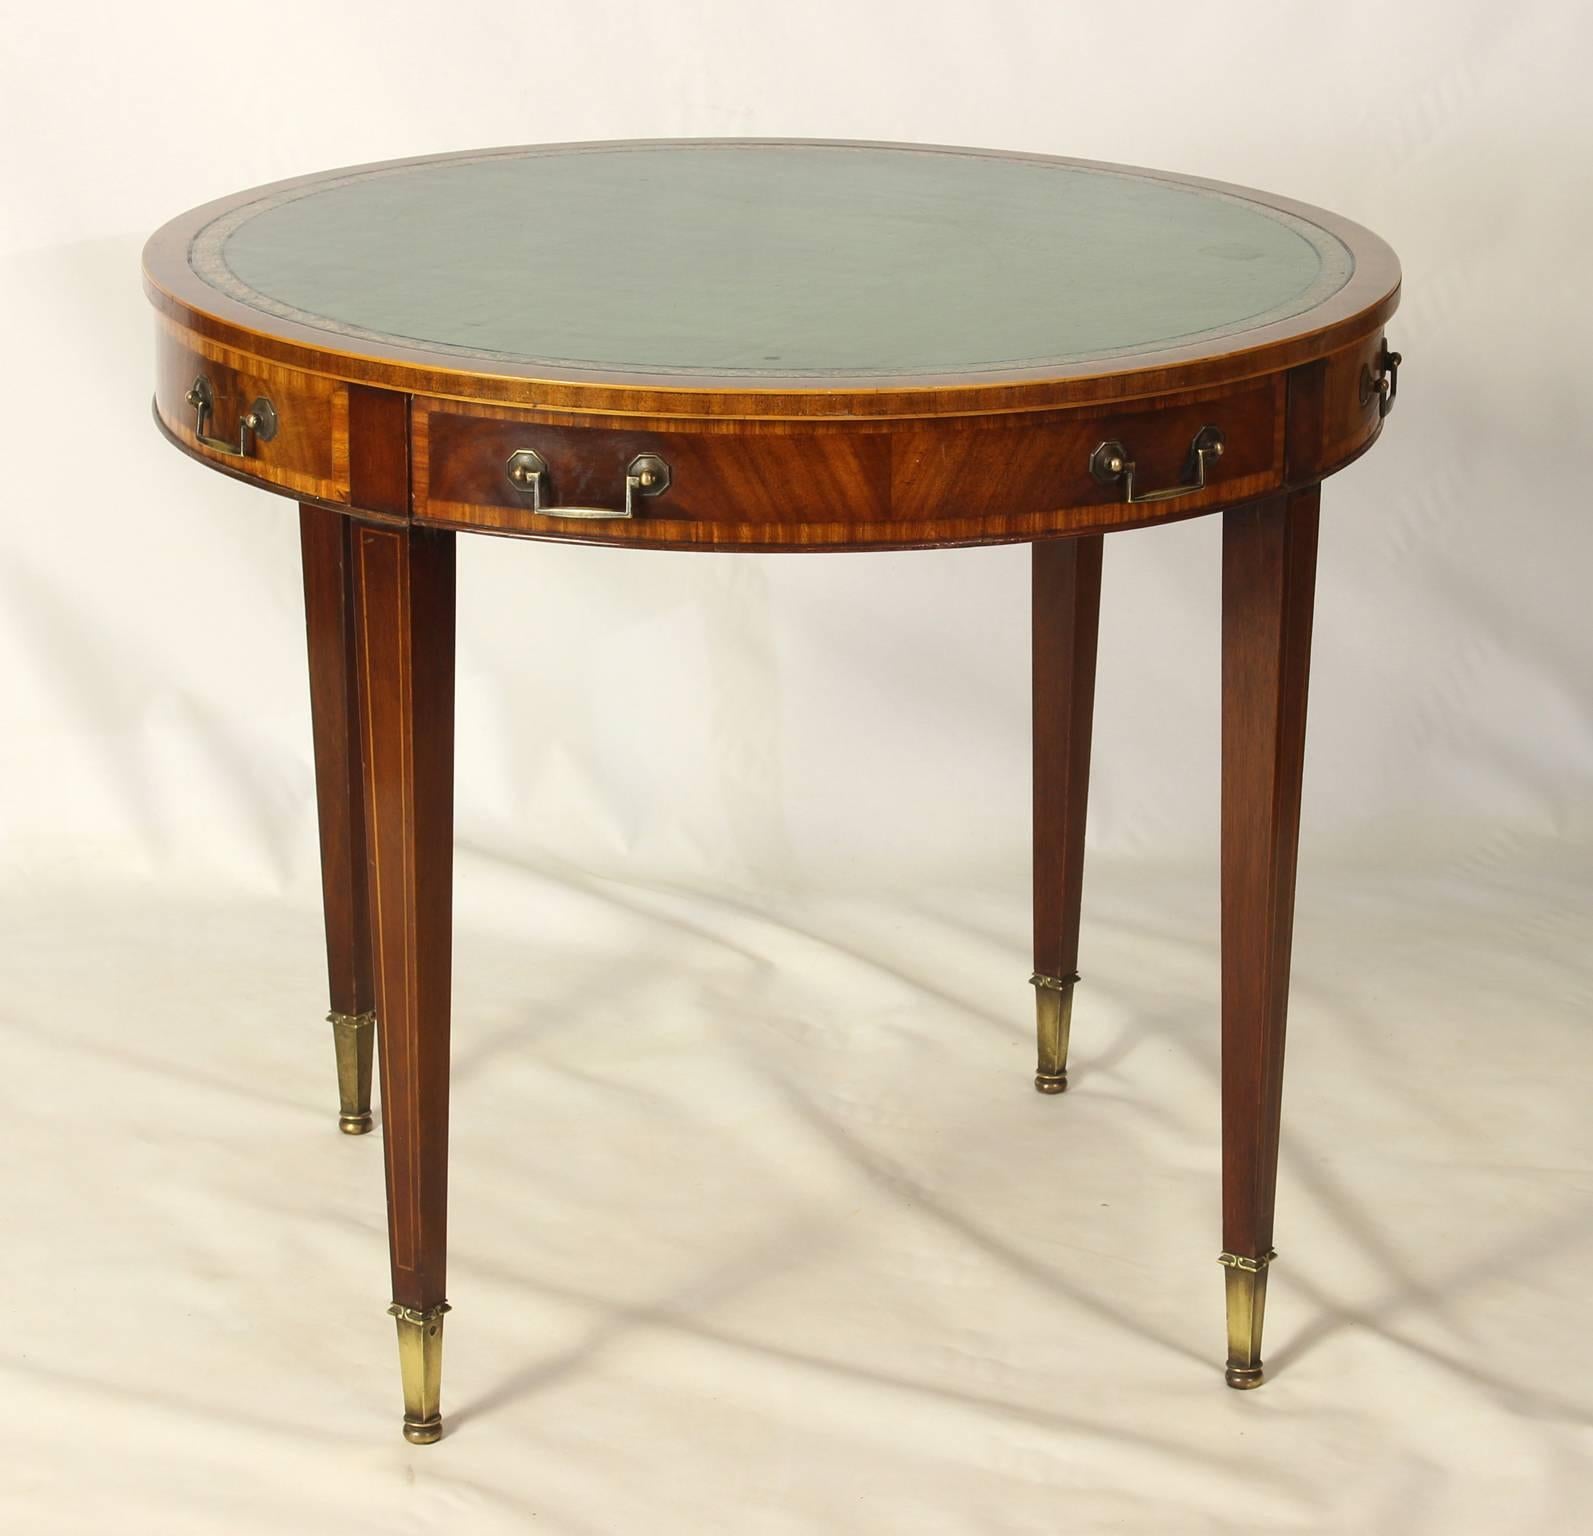 Early 20th Century Regency Style Leather Top Drum Table